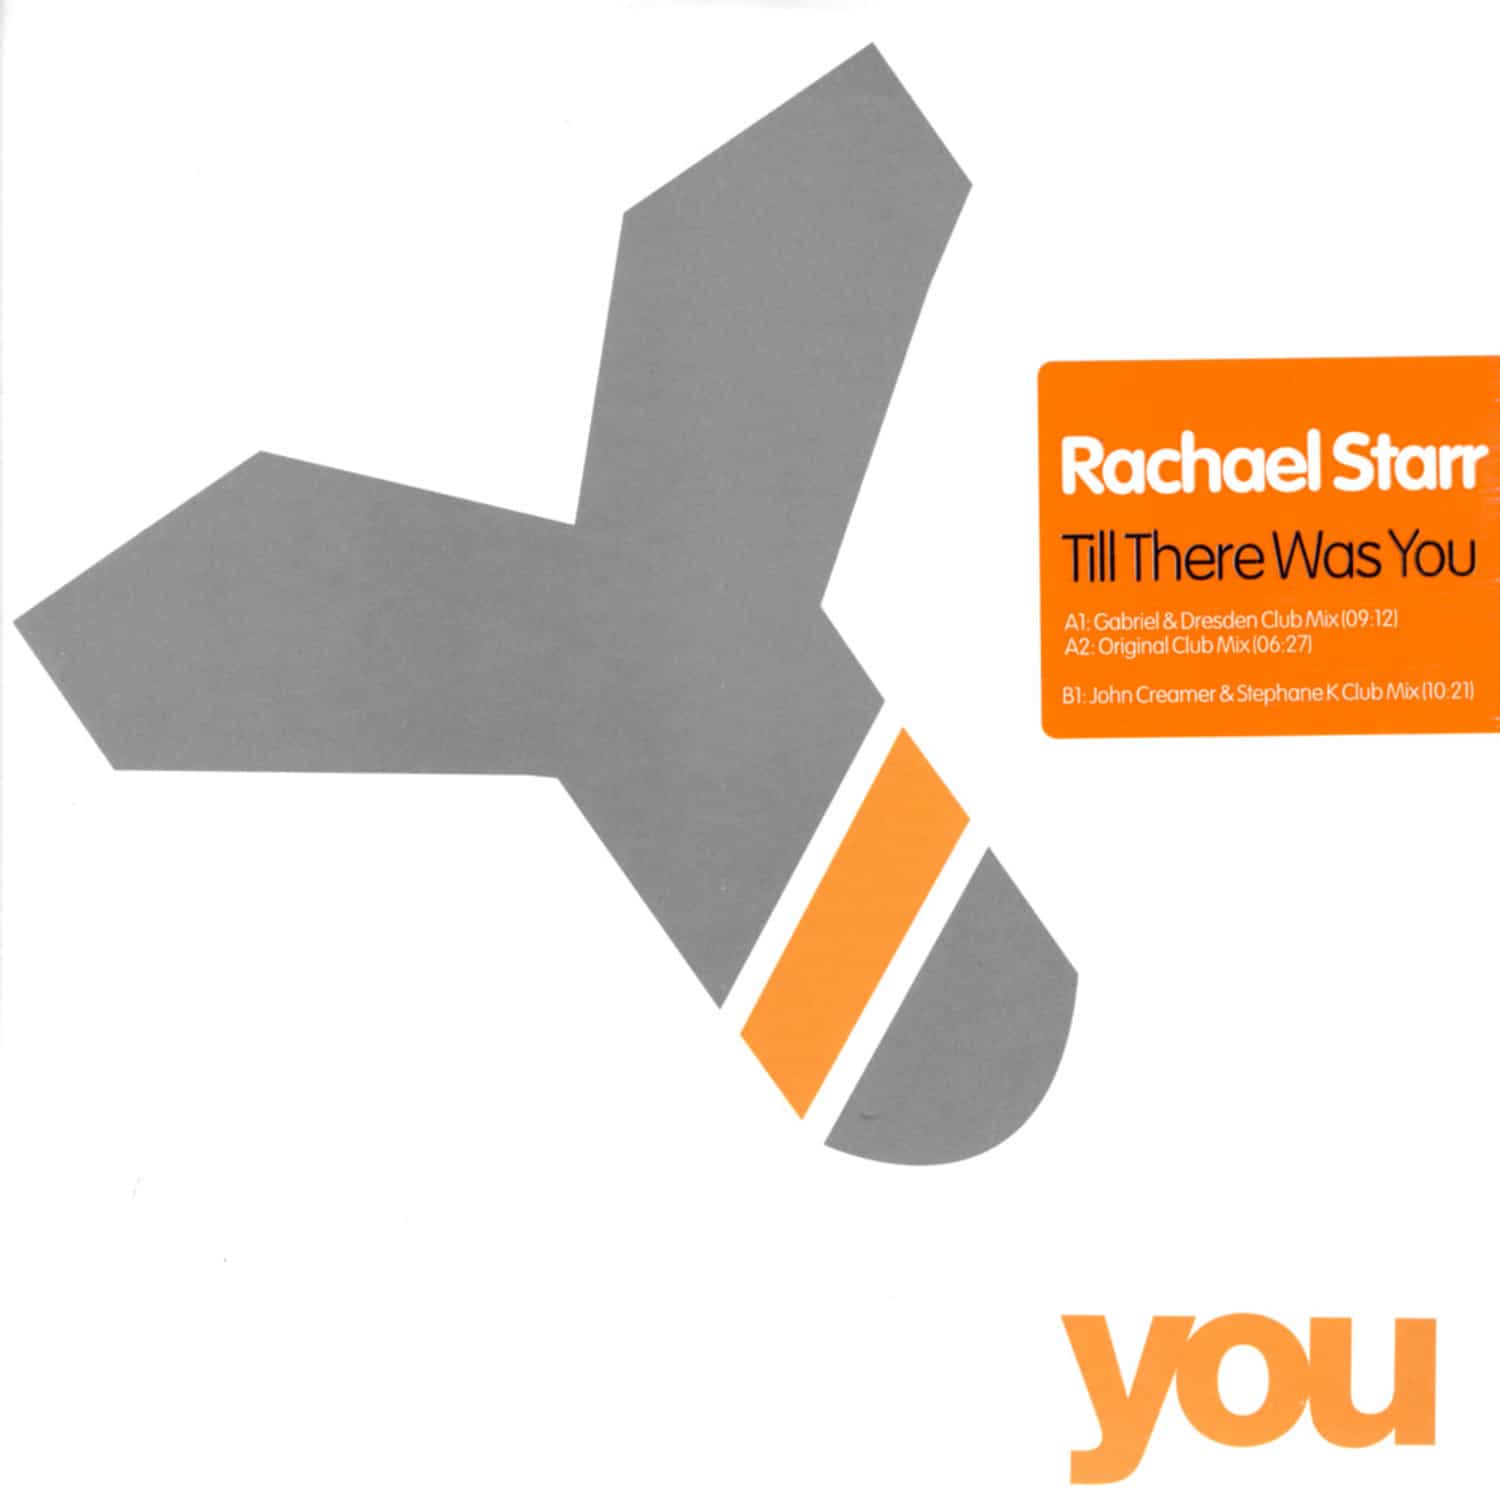 Rachael Starr - TILL THERE WAS